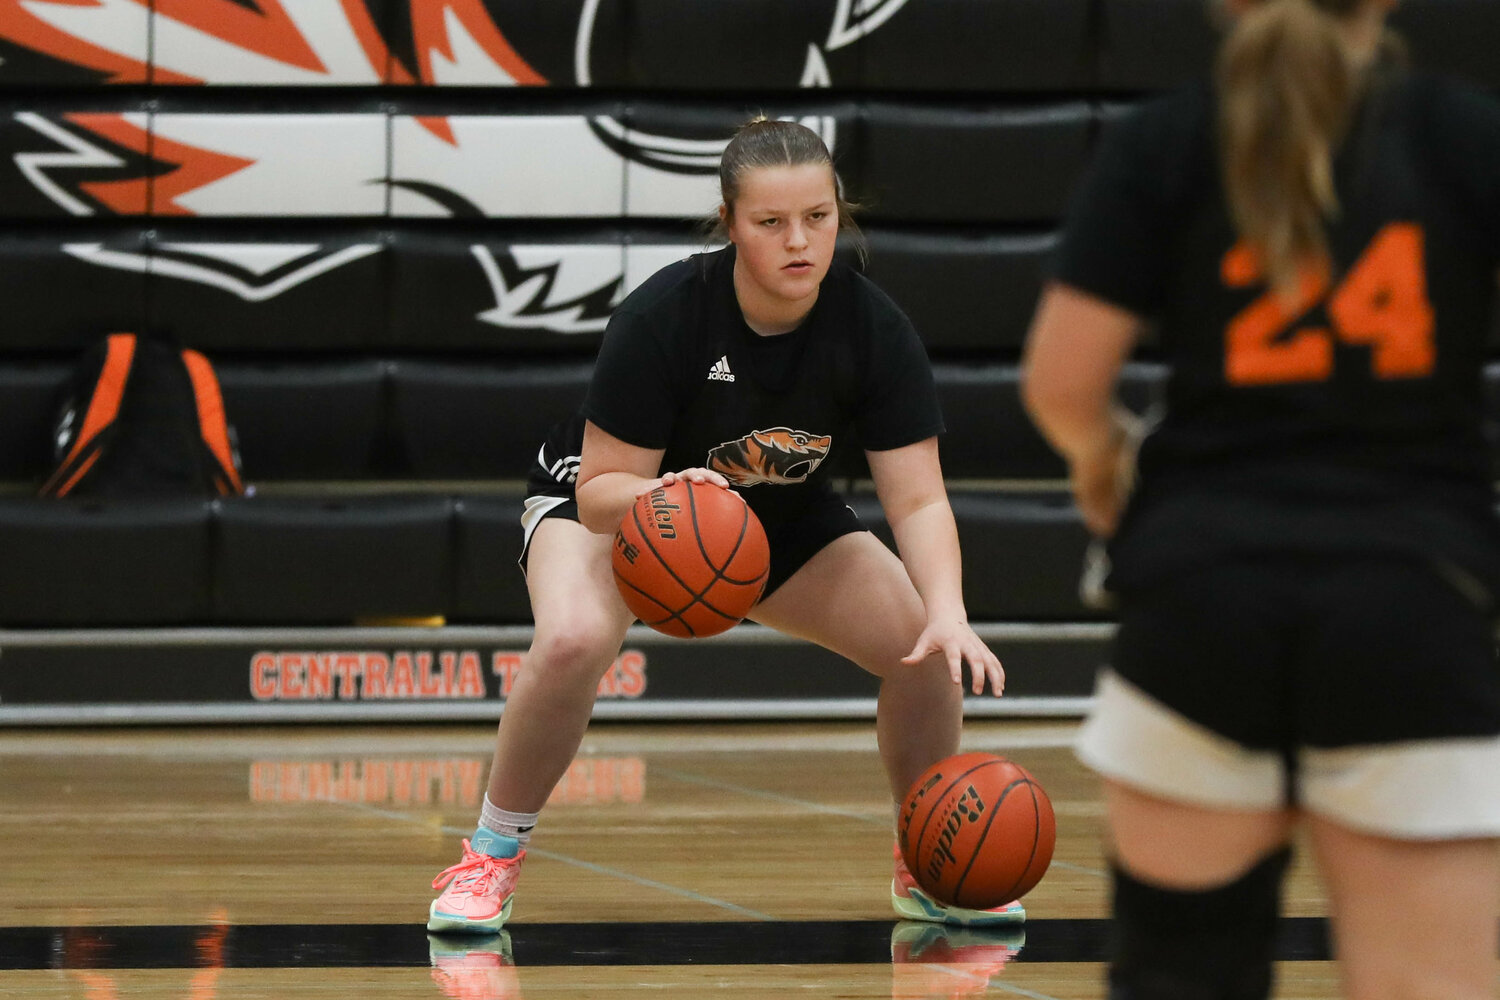 Payton Baumel warms up before Centralia's practice on Nov. 20.